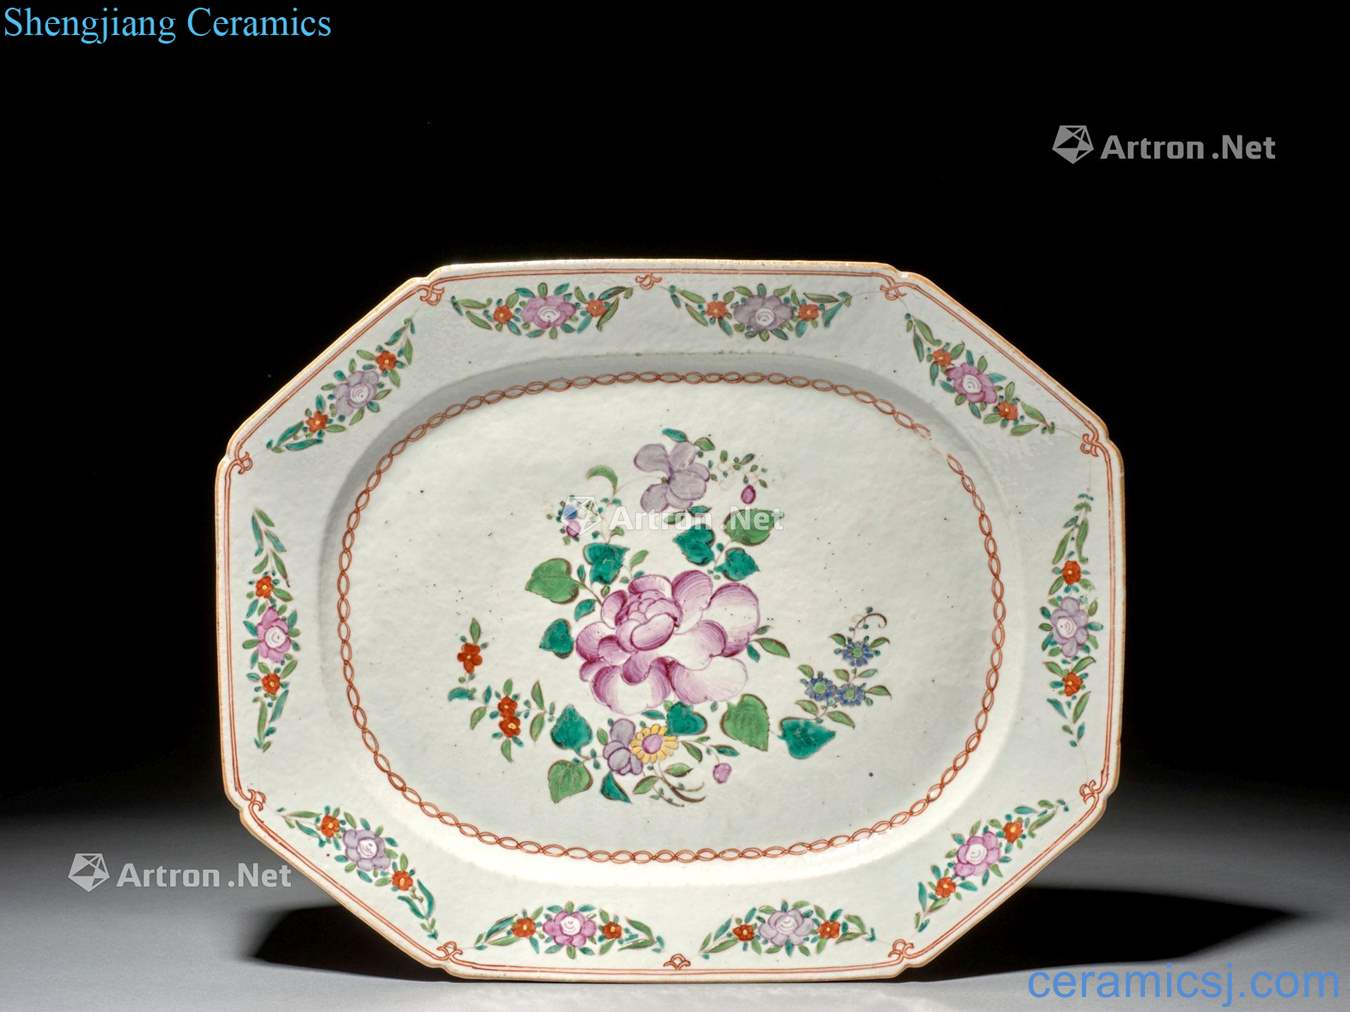 CHINA, the QING DYNASTY, 18 th CENTURY A FAMILLE ROSE PORCELAIN DISH